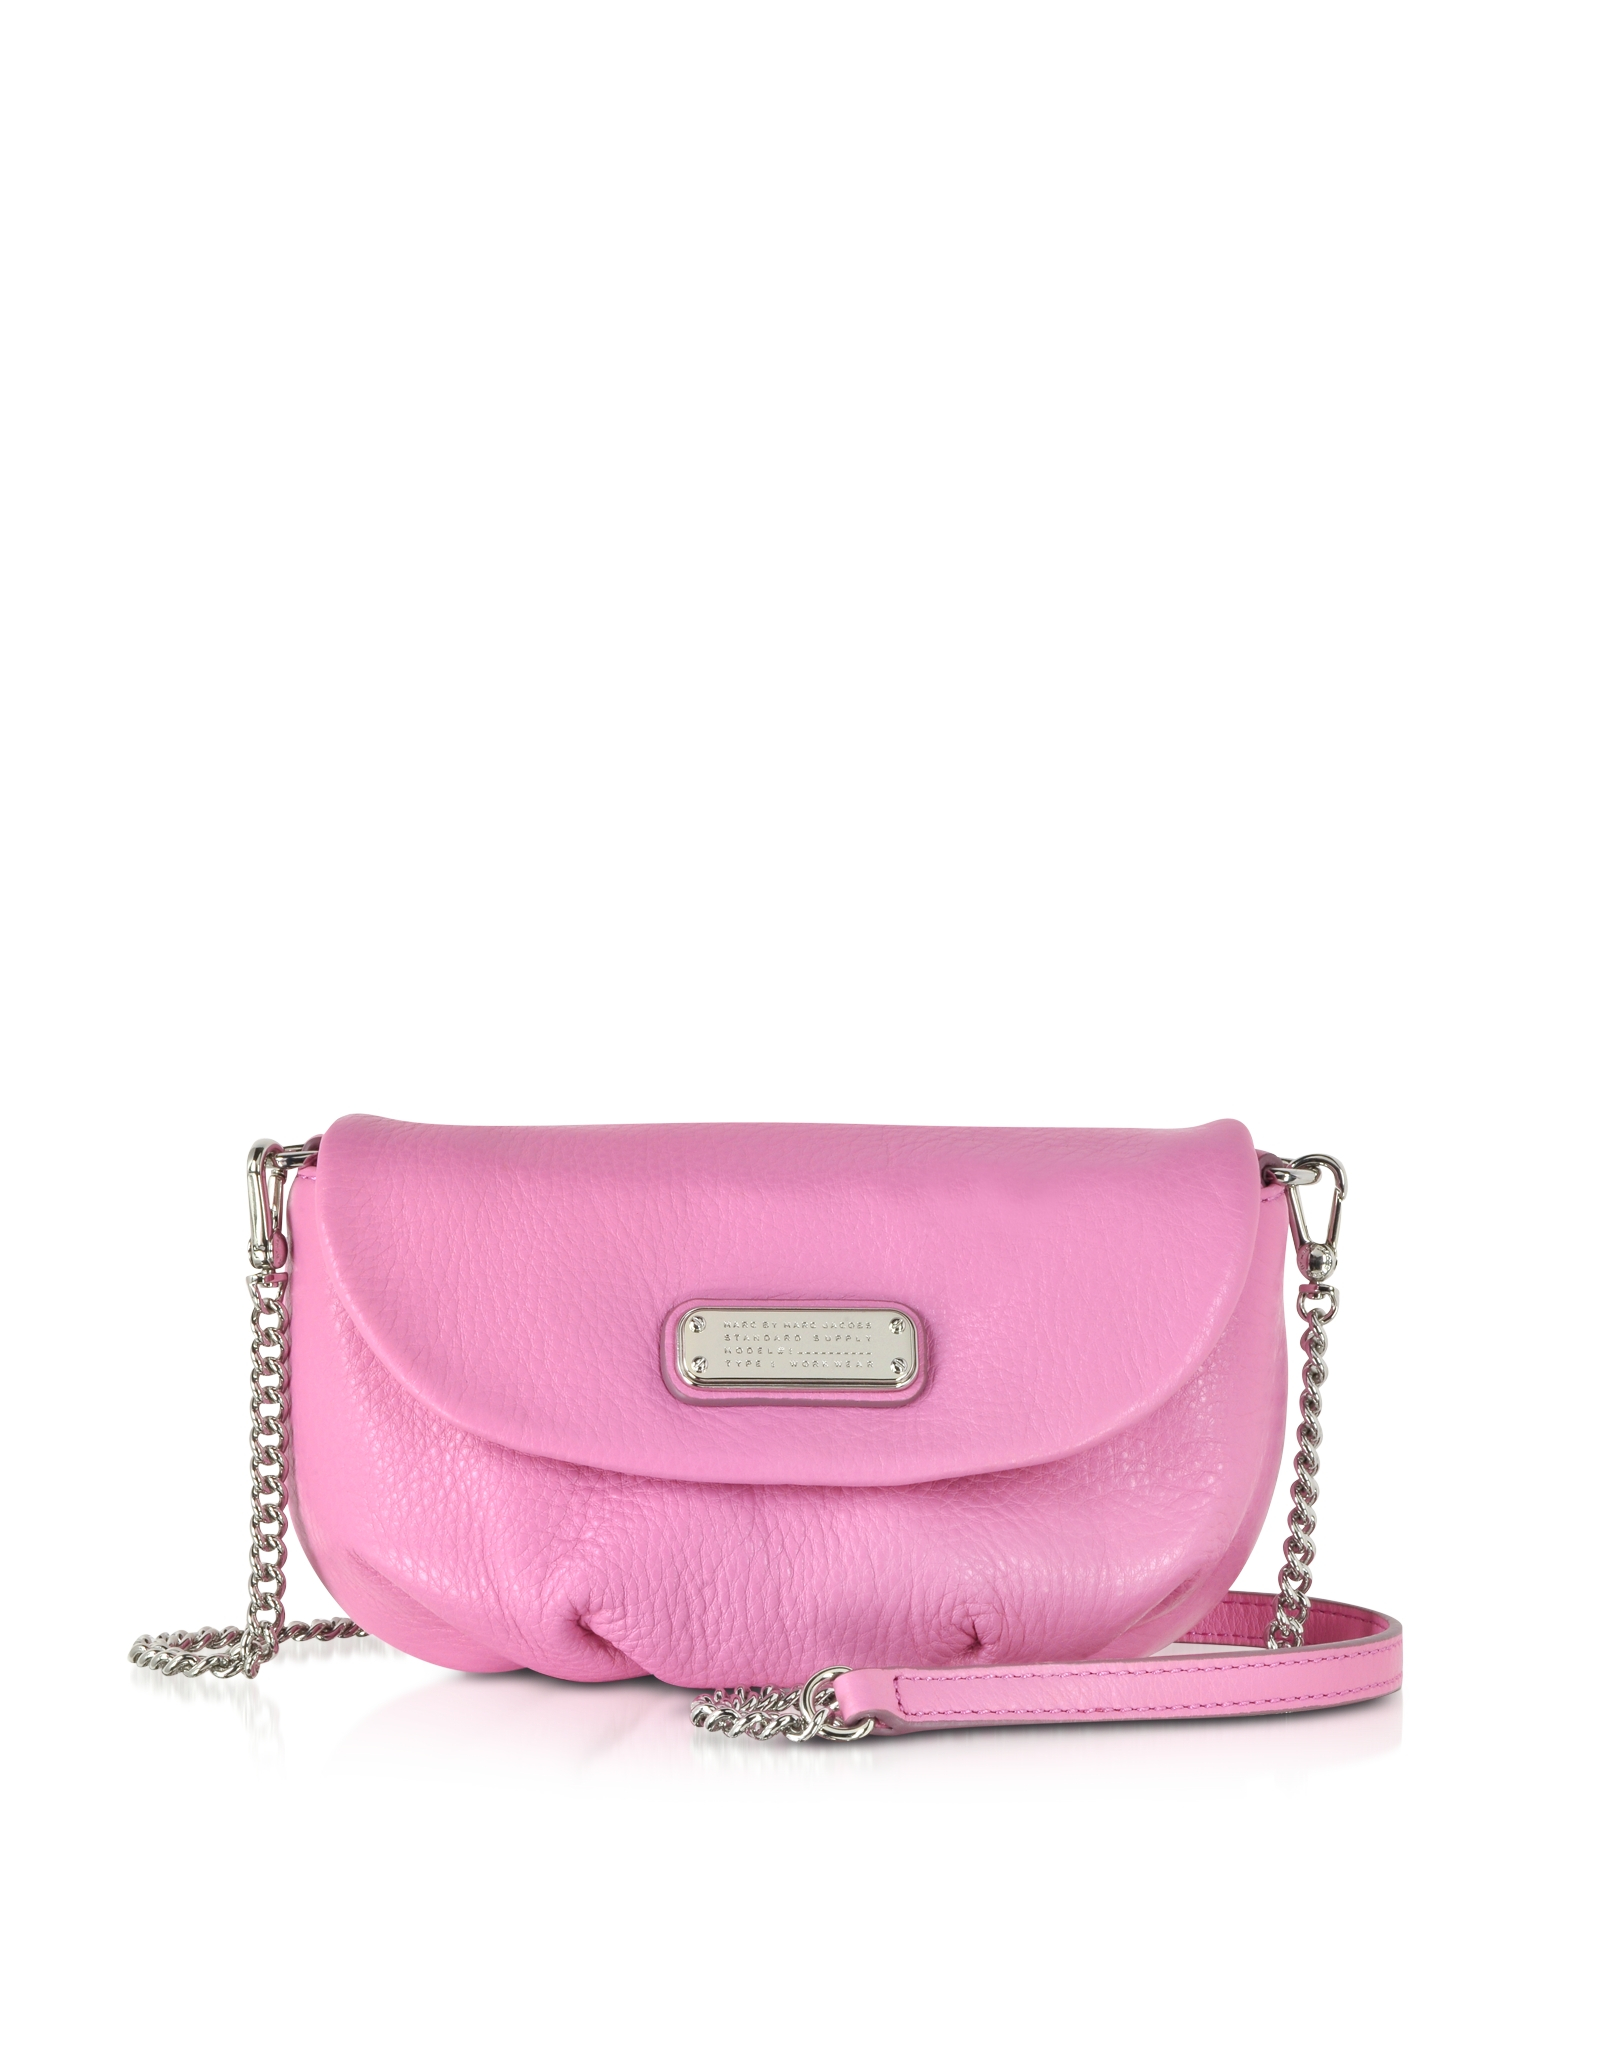 Marc by marc jacobs New Q Karlie Crossbody Bag in Pink | Lyst